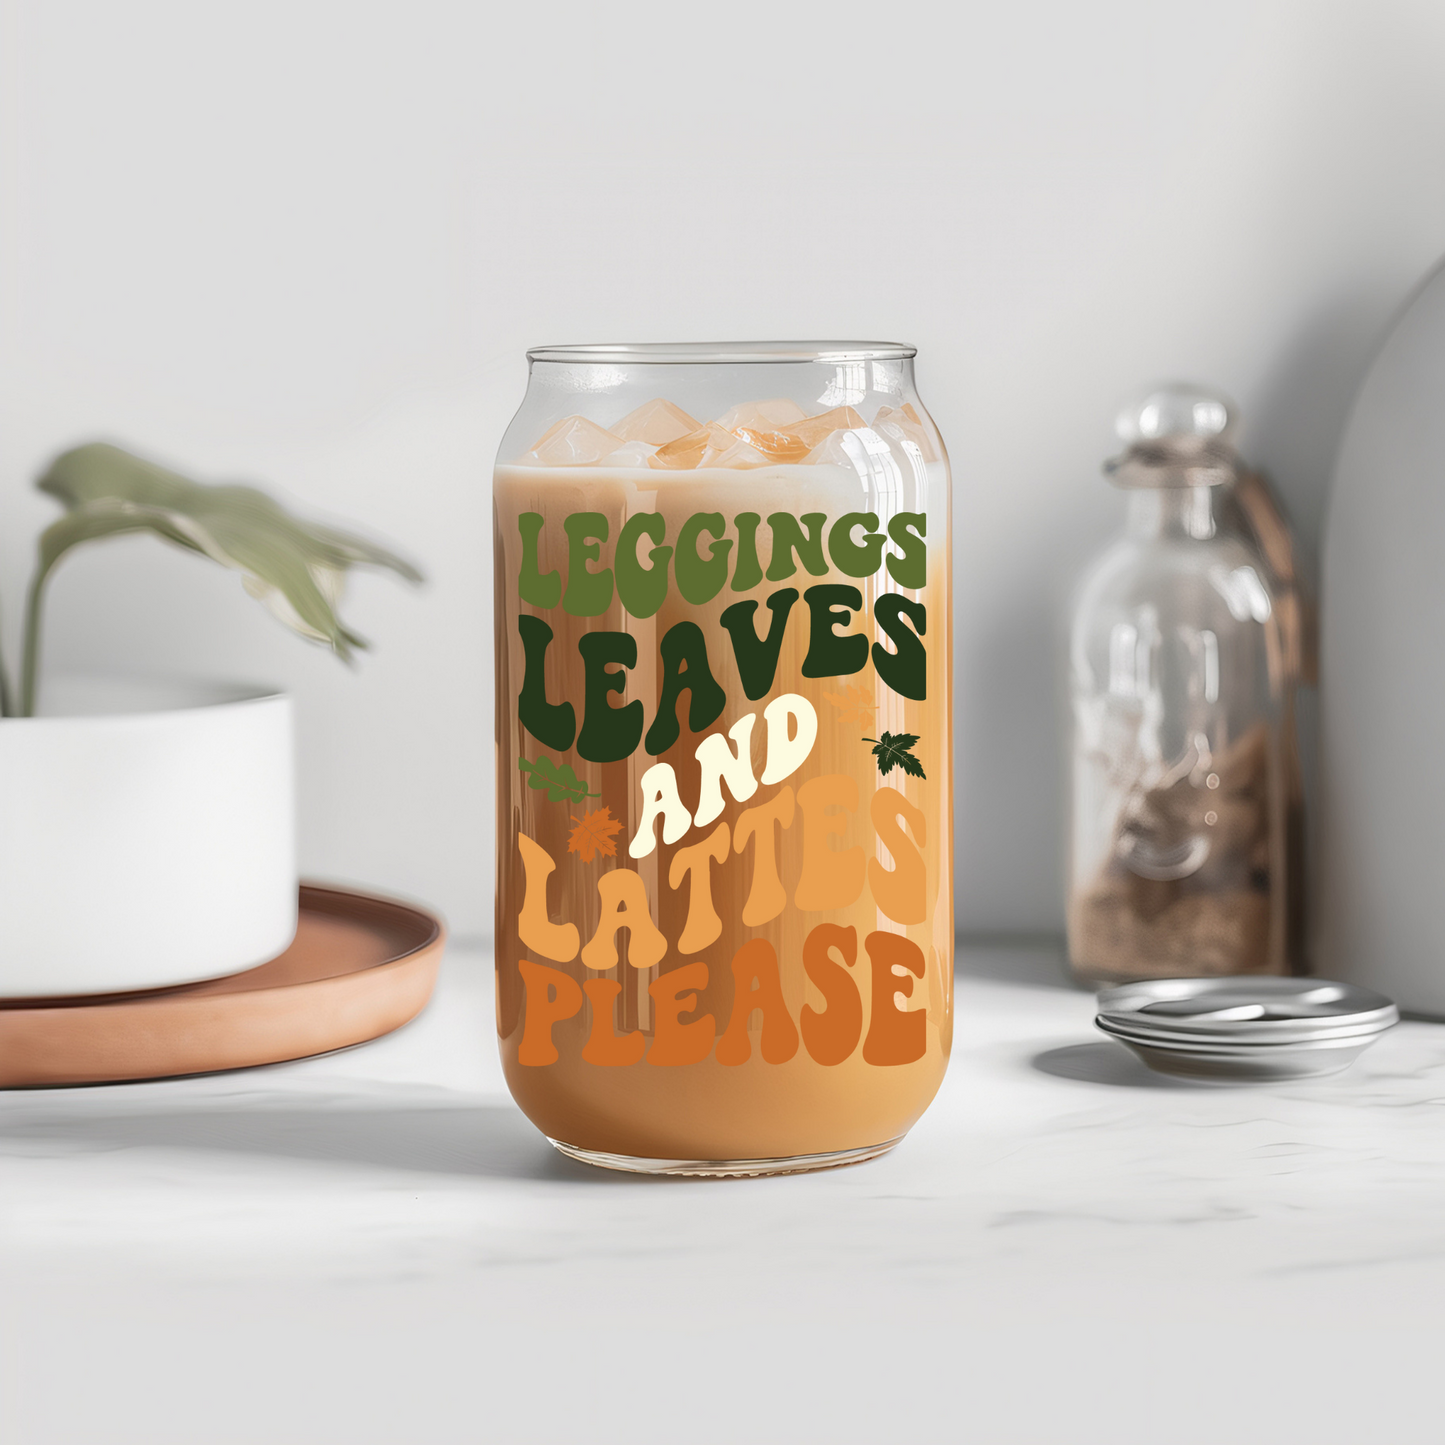 Fall Leggings Leaves - UVDTF Decals